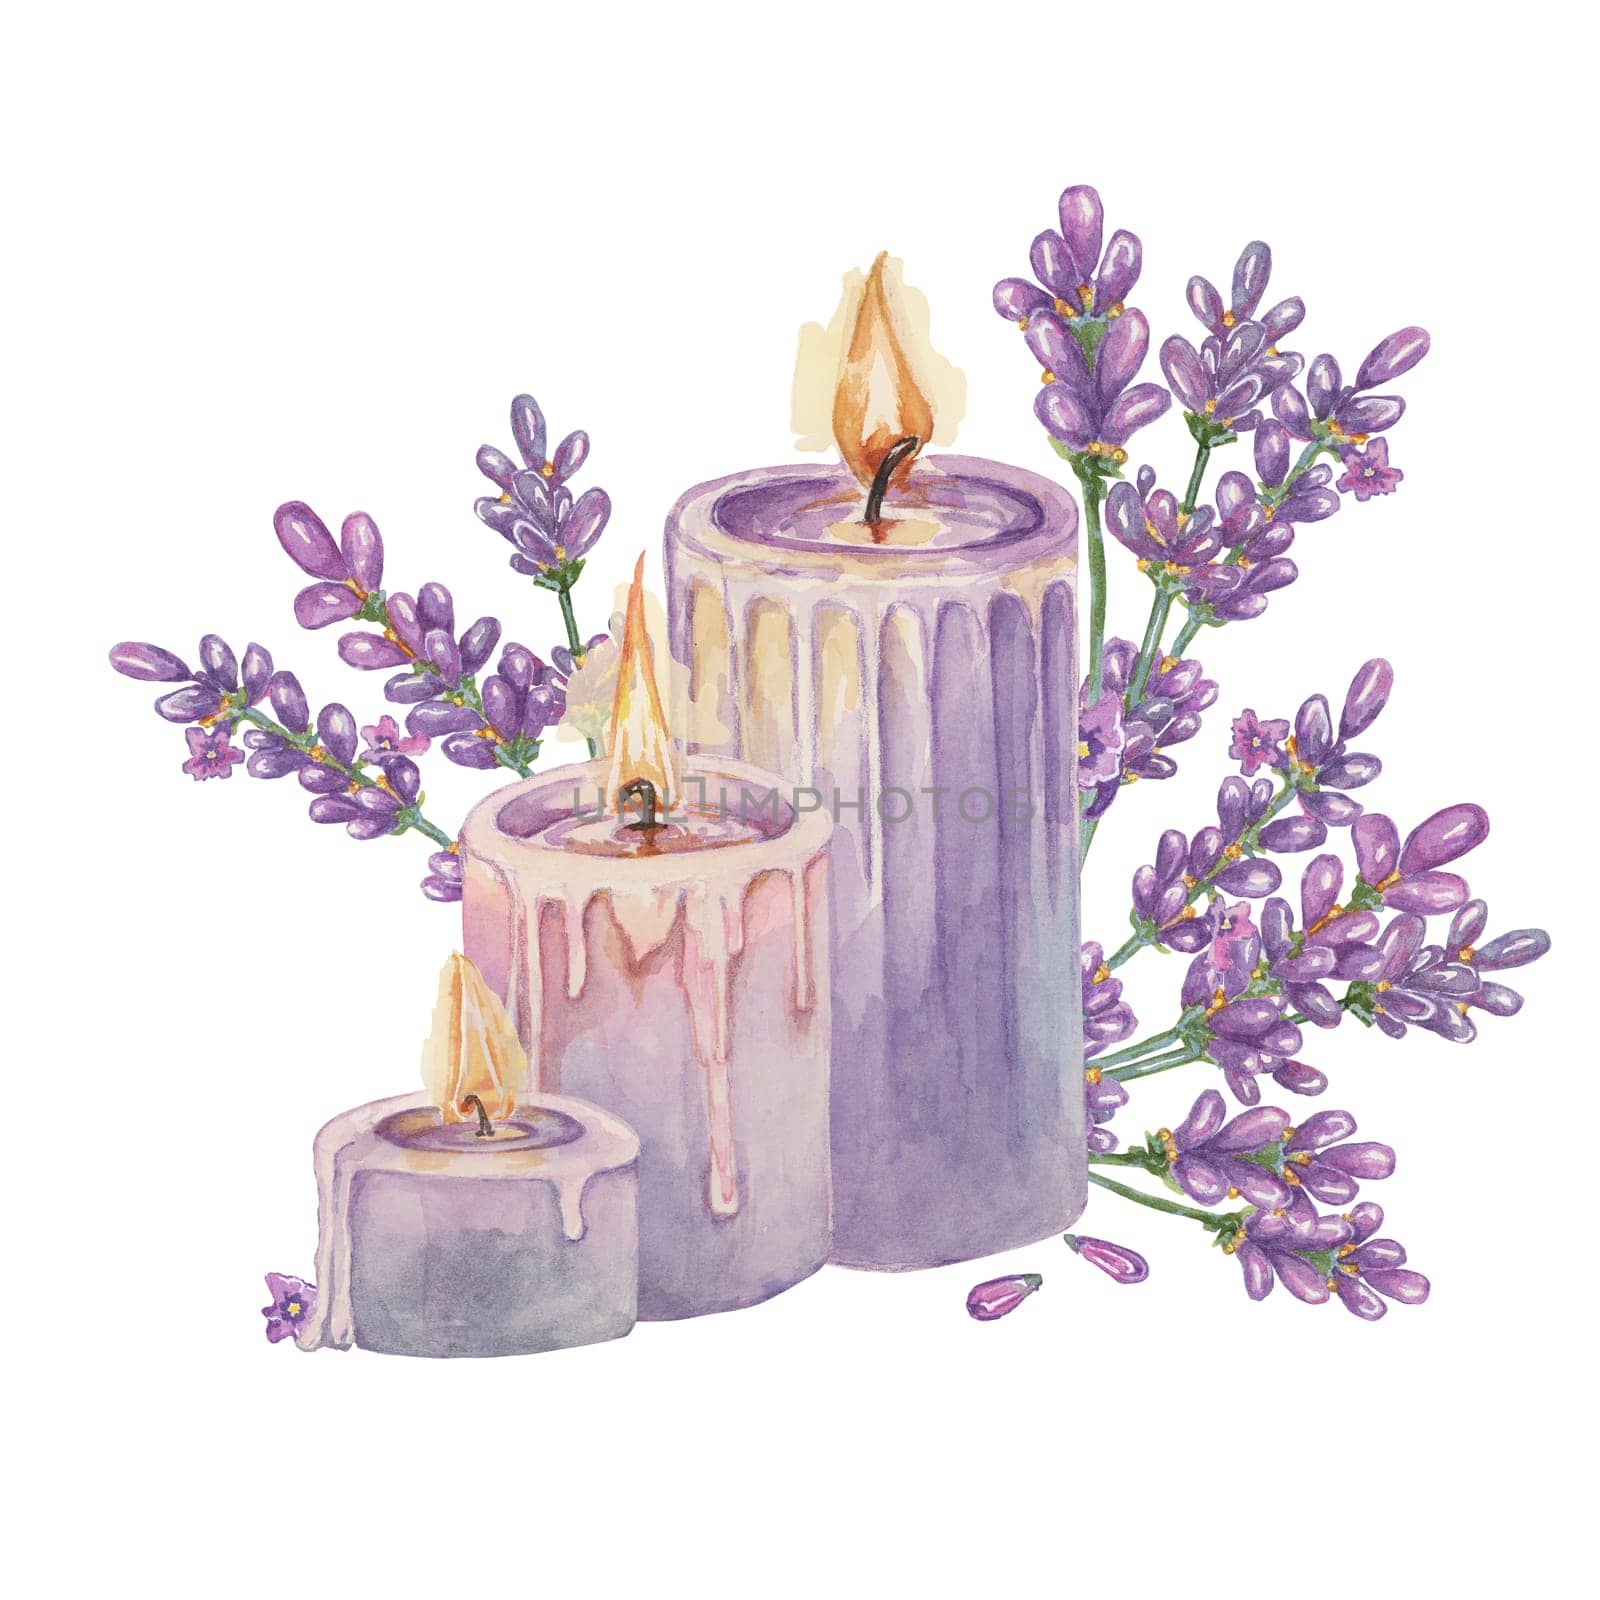 Lavender and candles, home fragrance composition. Home spa aromatherapy watercolor illustration. Clipart for beauty, cosmetics, wellness products by Fofito